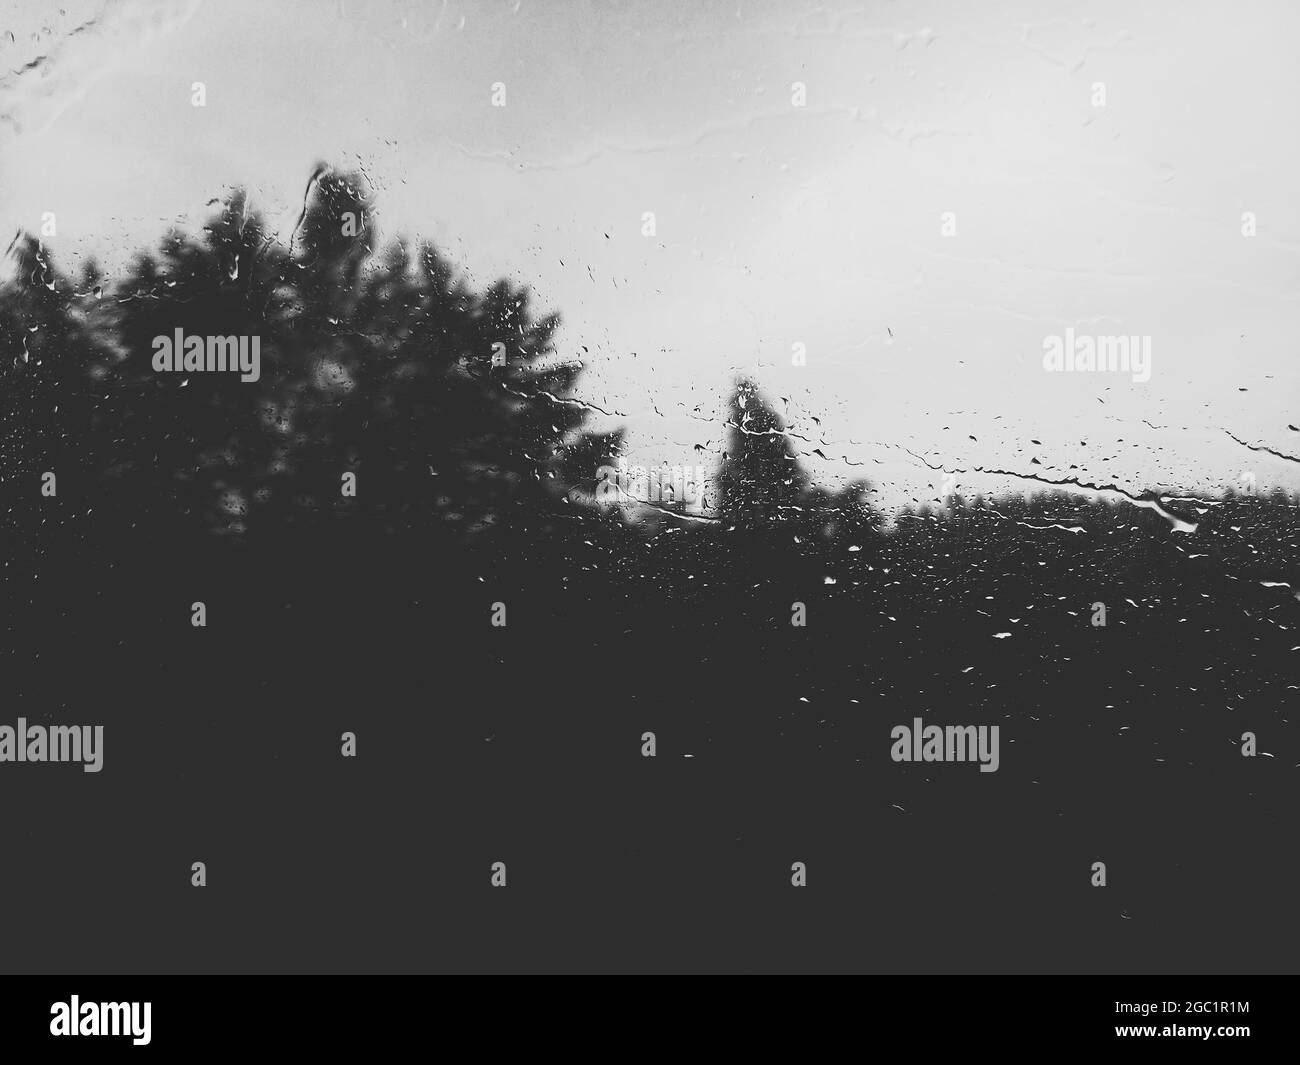 Raindrops on the car window glass. Road and trees. Black and white photo. Stock Photo